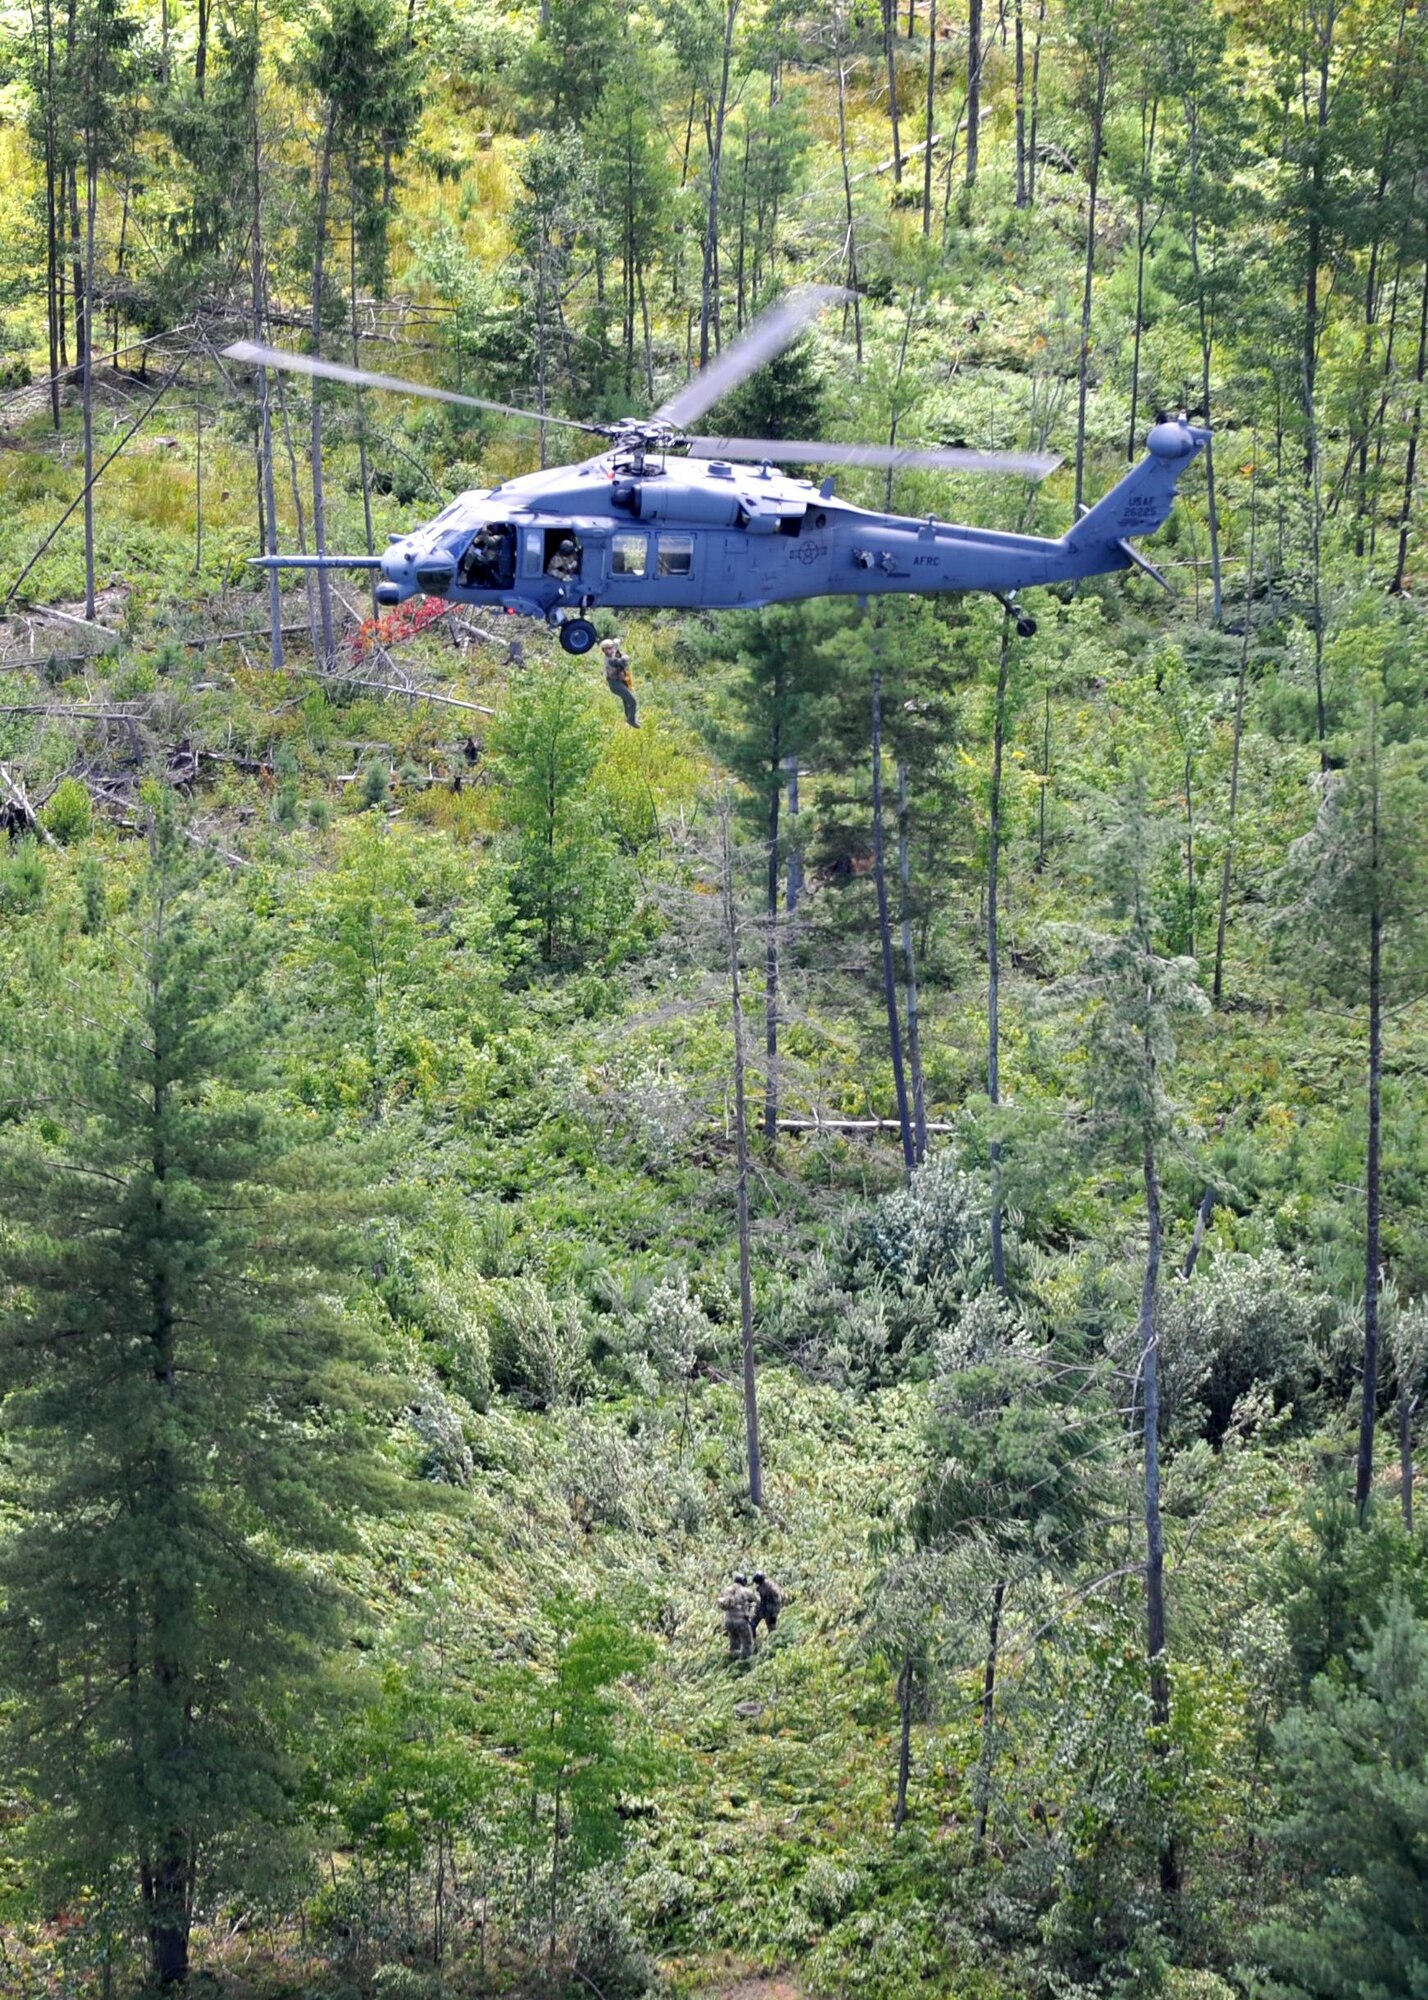 Air Force Reserve aircrew from the 943rd Rescue Group at Davis-Monthan Air Force Base, Ariz., hoist a (simulated) crash "survivor" out of the woods during a combat search and rescue training flight in upstate New York Aug. 2 while Tech. Sgt. Gary Waltz and Staff Sgt. Erik Wieland, two 306th Rescue Squadron SERE (Survive, Evade, Resist, Escape) specialists (pictured on the ground) assist the "survivor" in evading the opposing forces role players. As a part of the Guardian Angels, SERE specialists assist with recovery of isolated personnel. (U.S. Air Force photo by Carolyn Herrick)